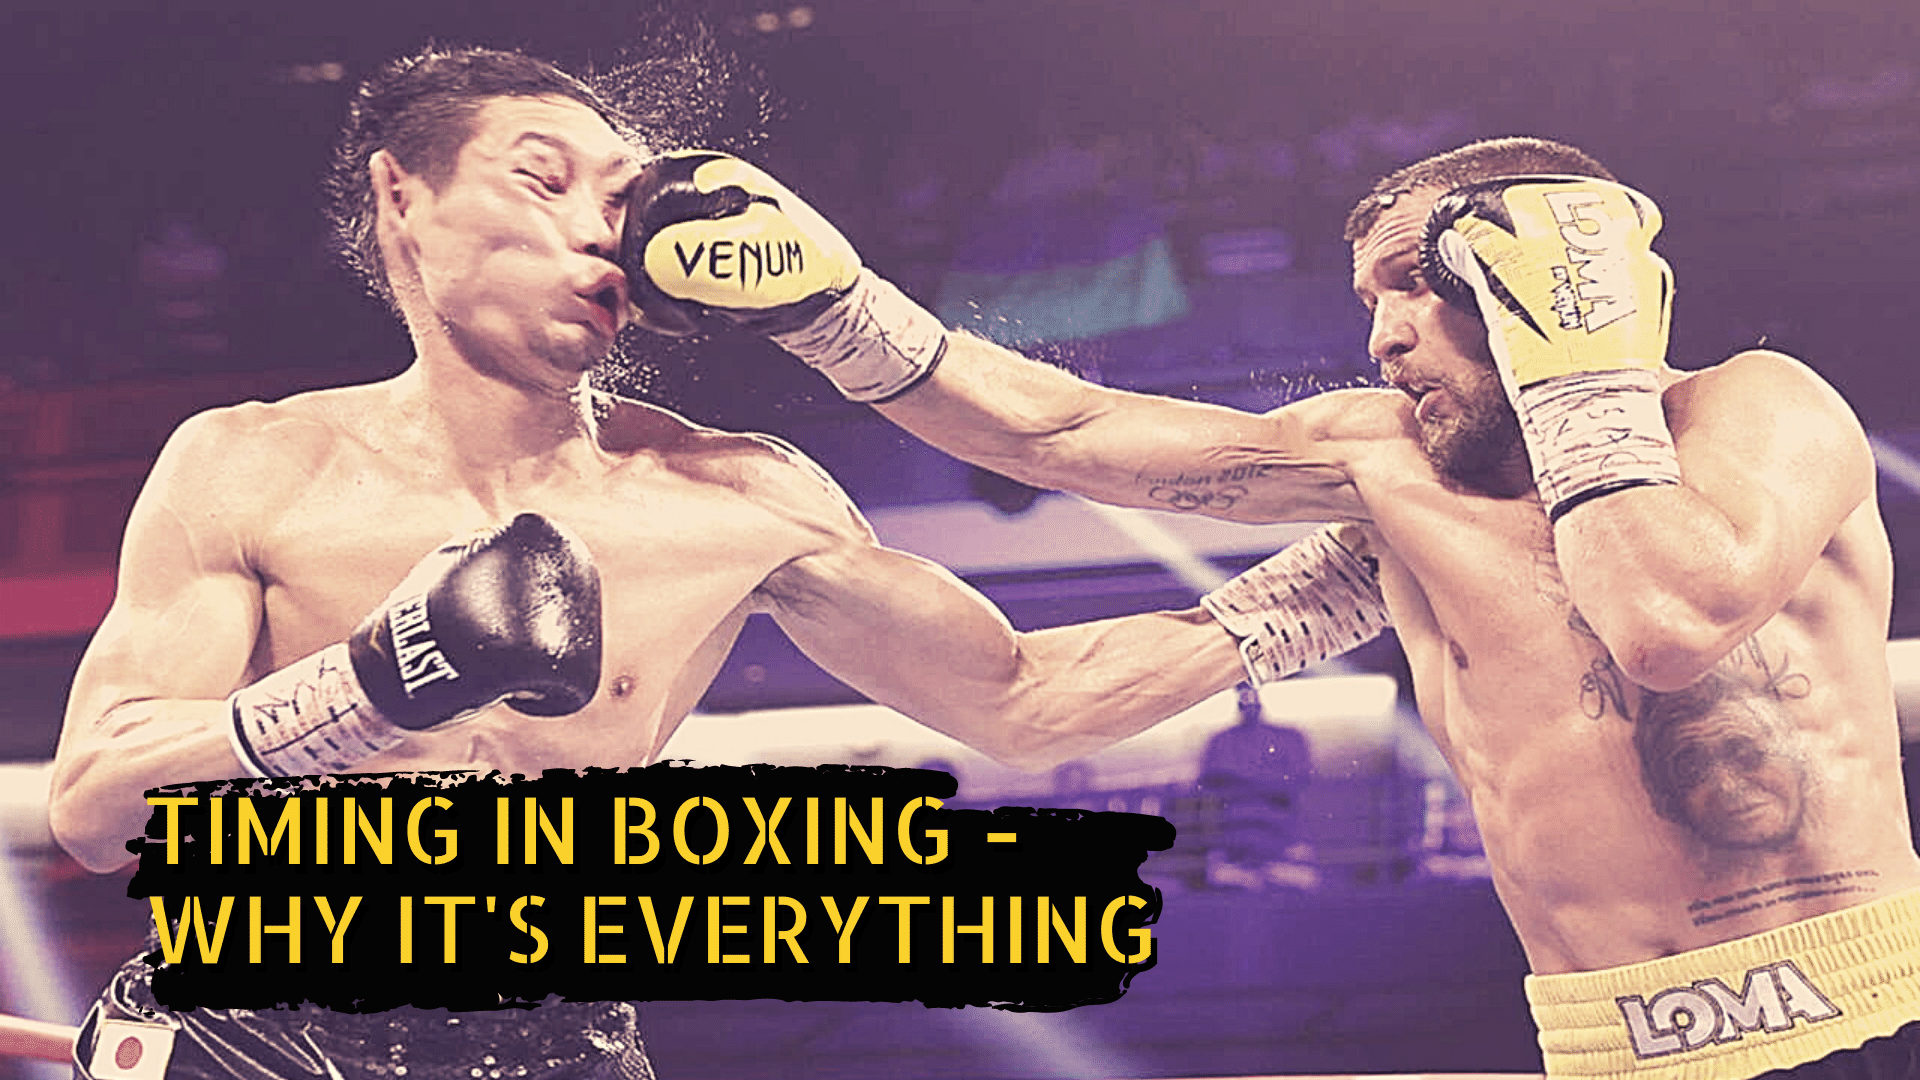 Two boxers fighting with the title: Timing in Boxing - Why it's everything